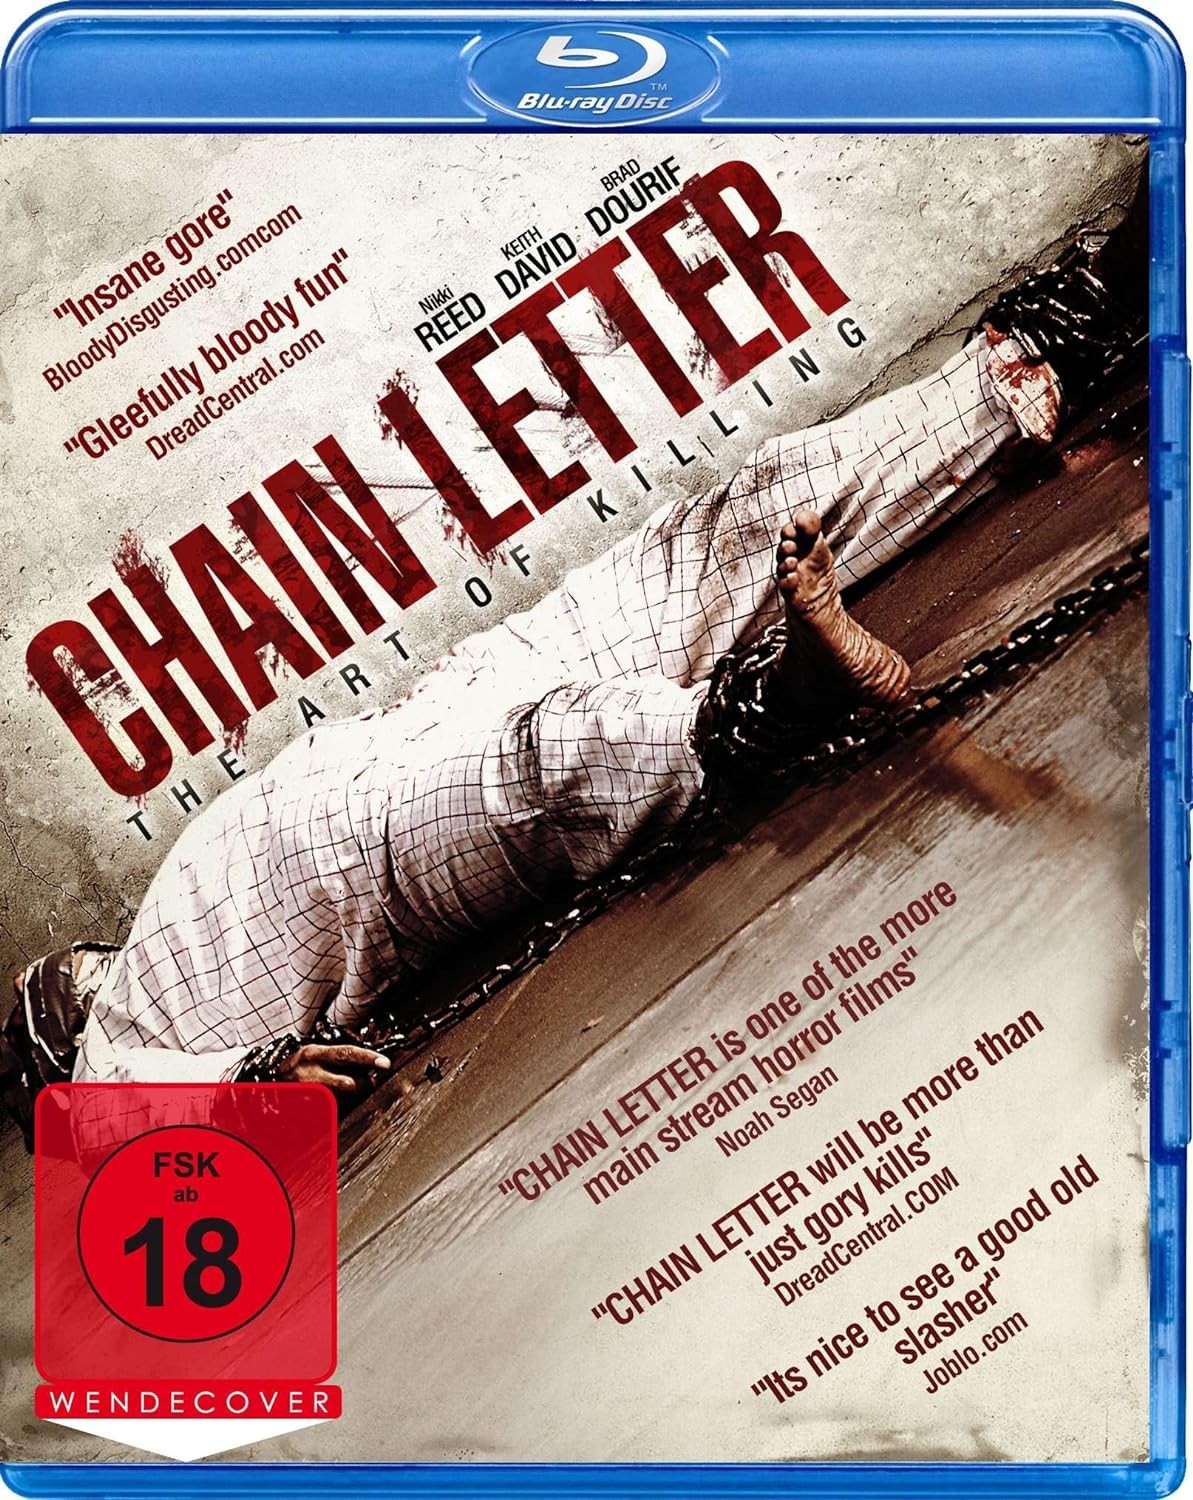 Blu Ray - Chain Letter